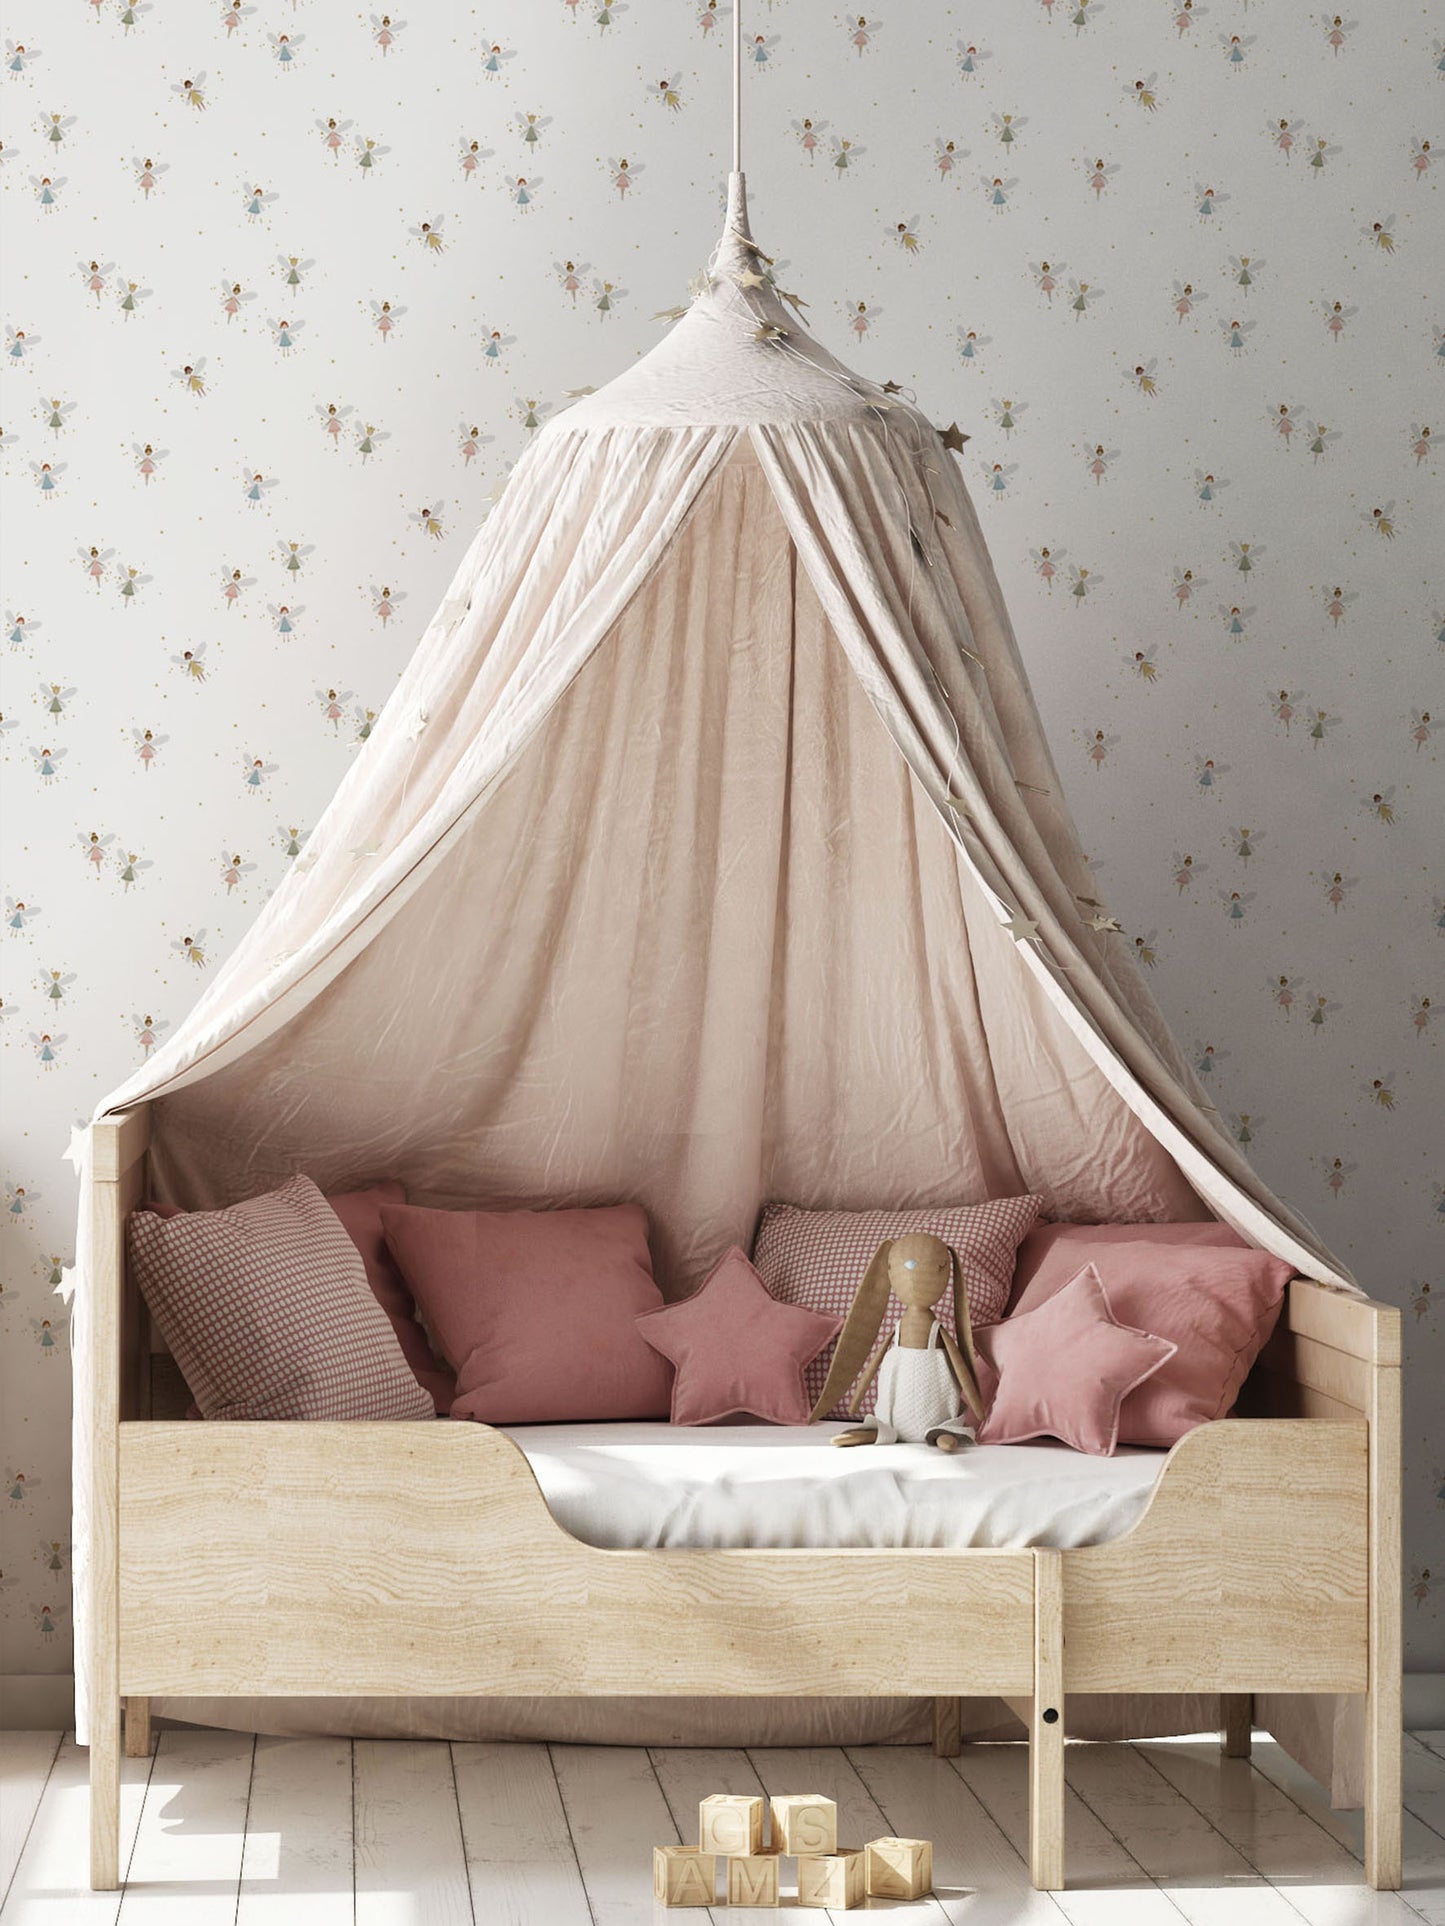 Girls bedroom with canopy over pine bed, cushions, Fairy Dust luxury children's wallpaper